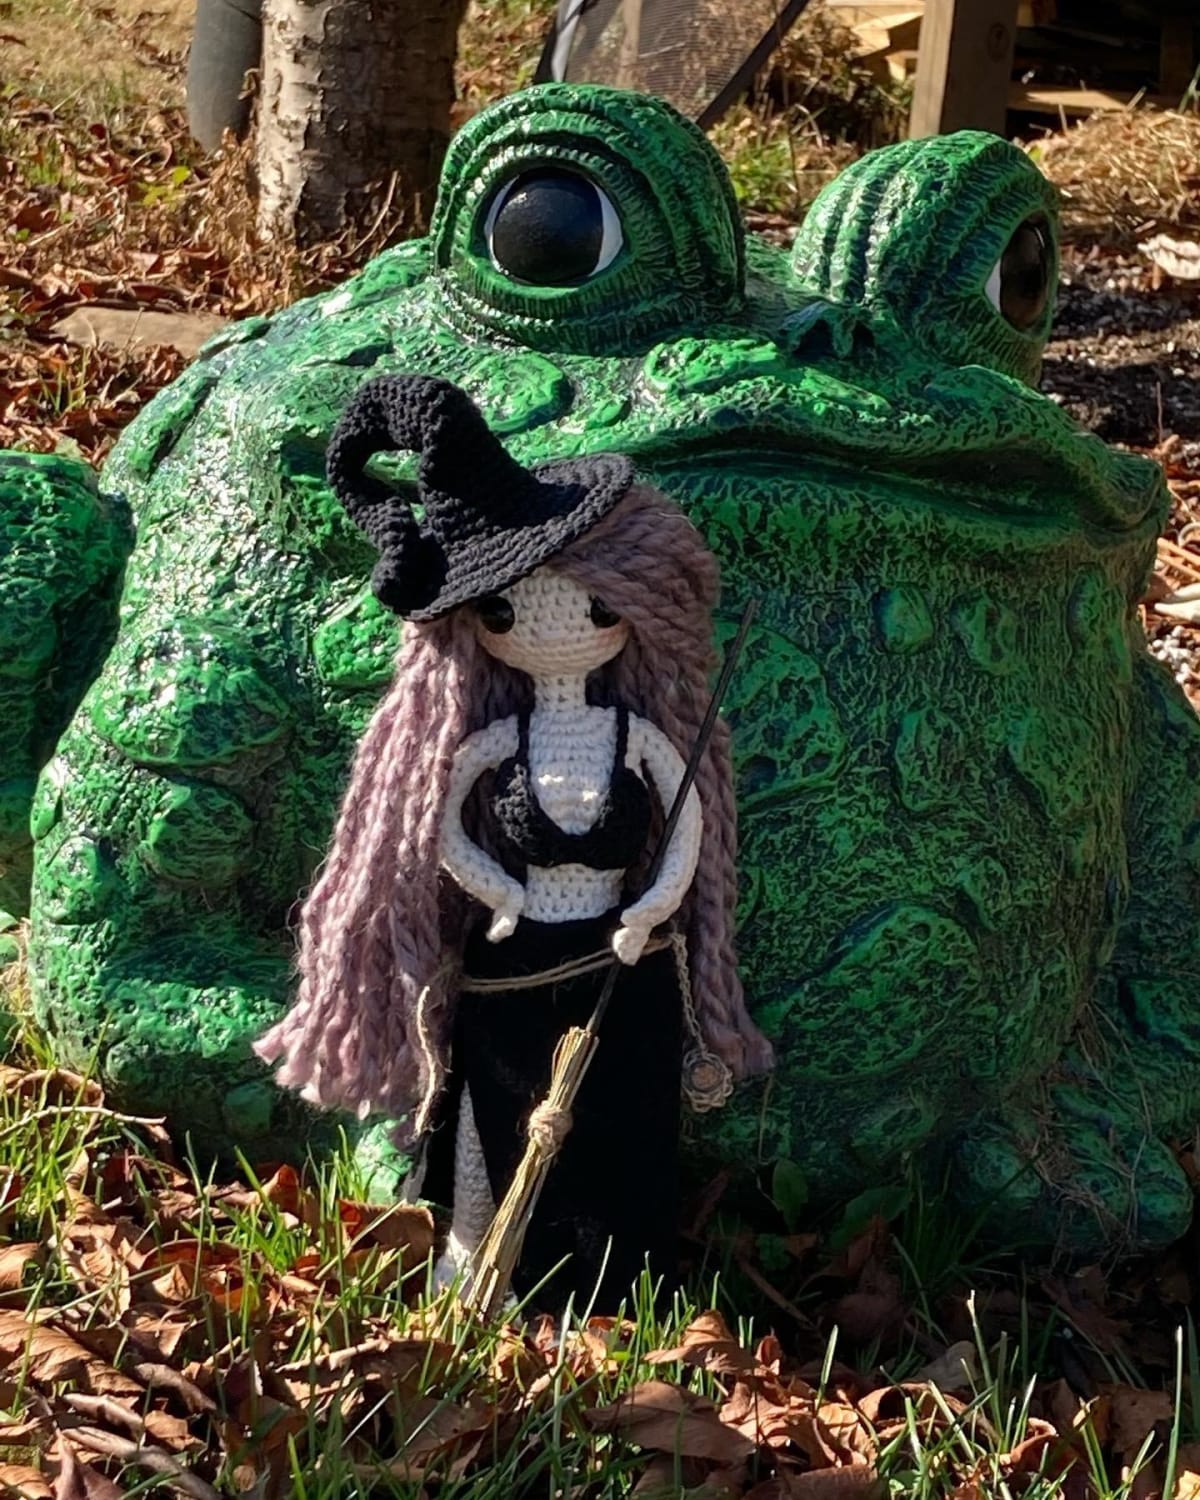 Who needs a prince when we have frogs!